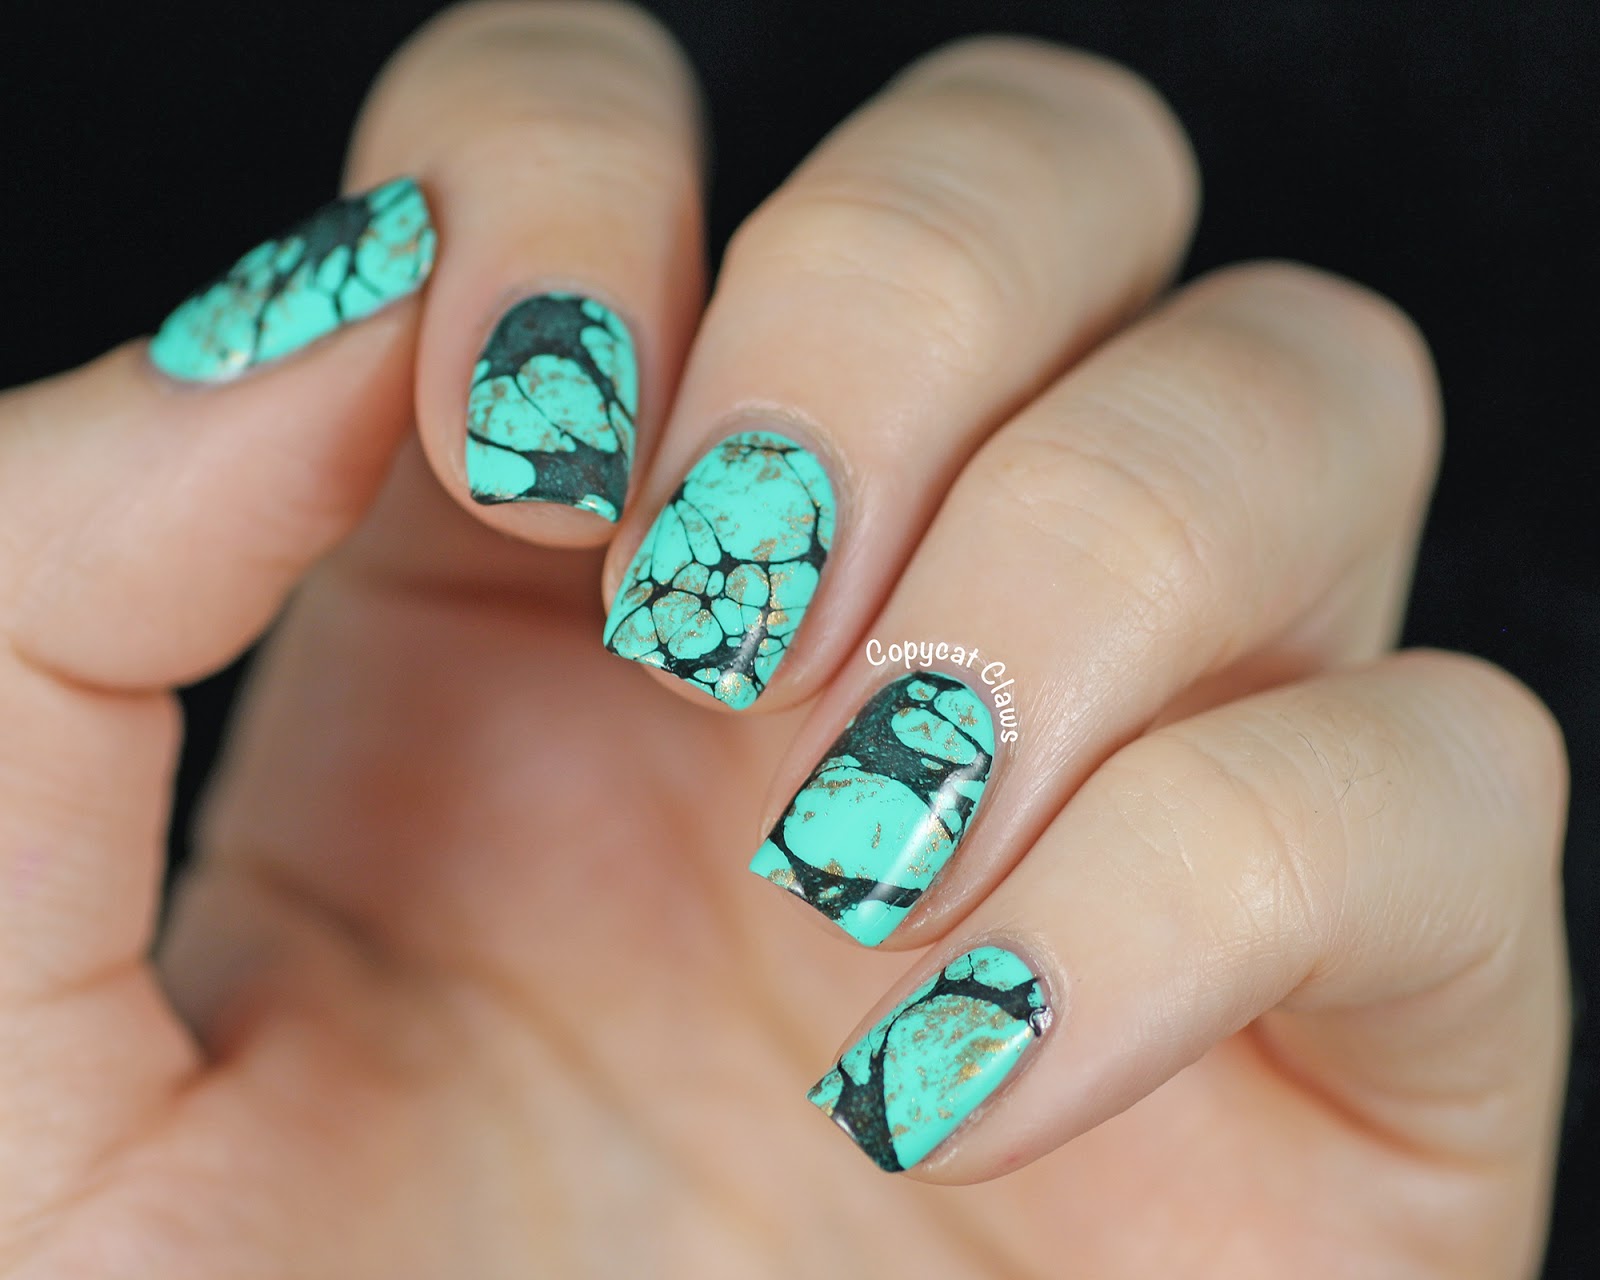 Copycat Claws: Turquoise Stone Nail Art amp; China Glaze Too Yacht To 